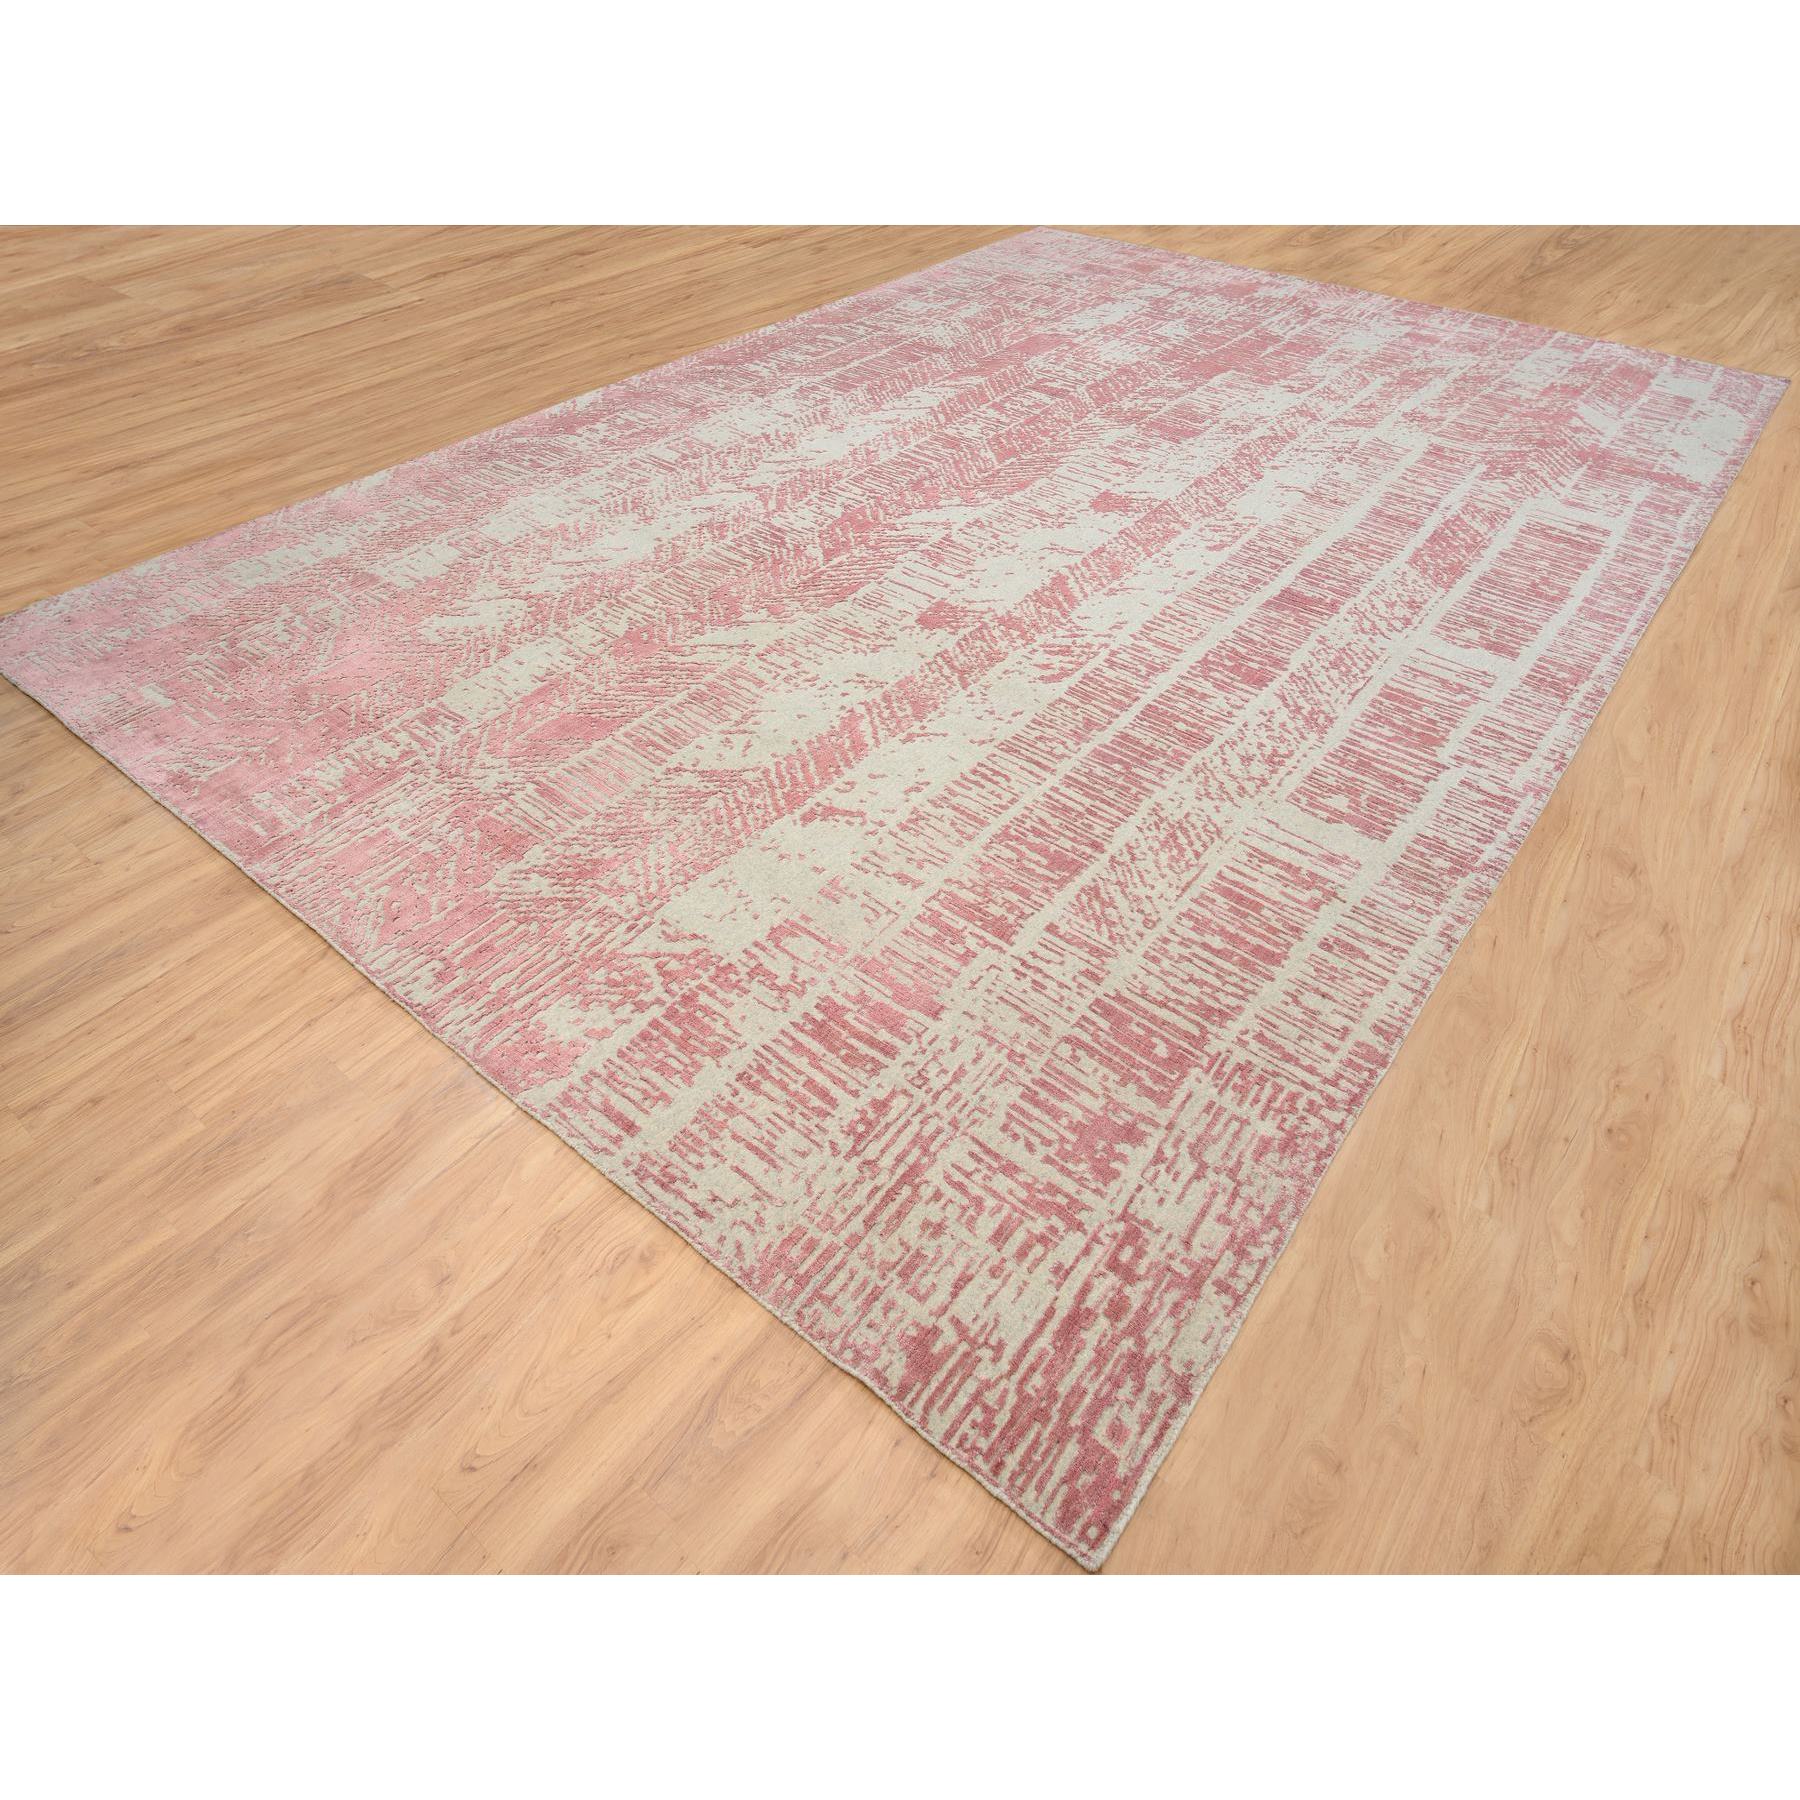 11'10"x17'10" Rose Pink, All Over Design Wool and Art Silk, Jacquard Hand Loomed, Oversized Oriental Rug 